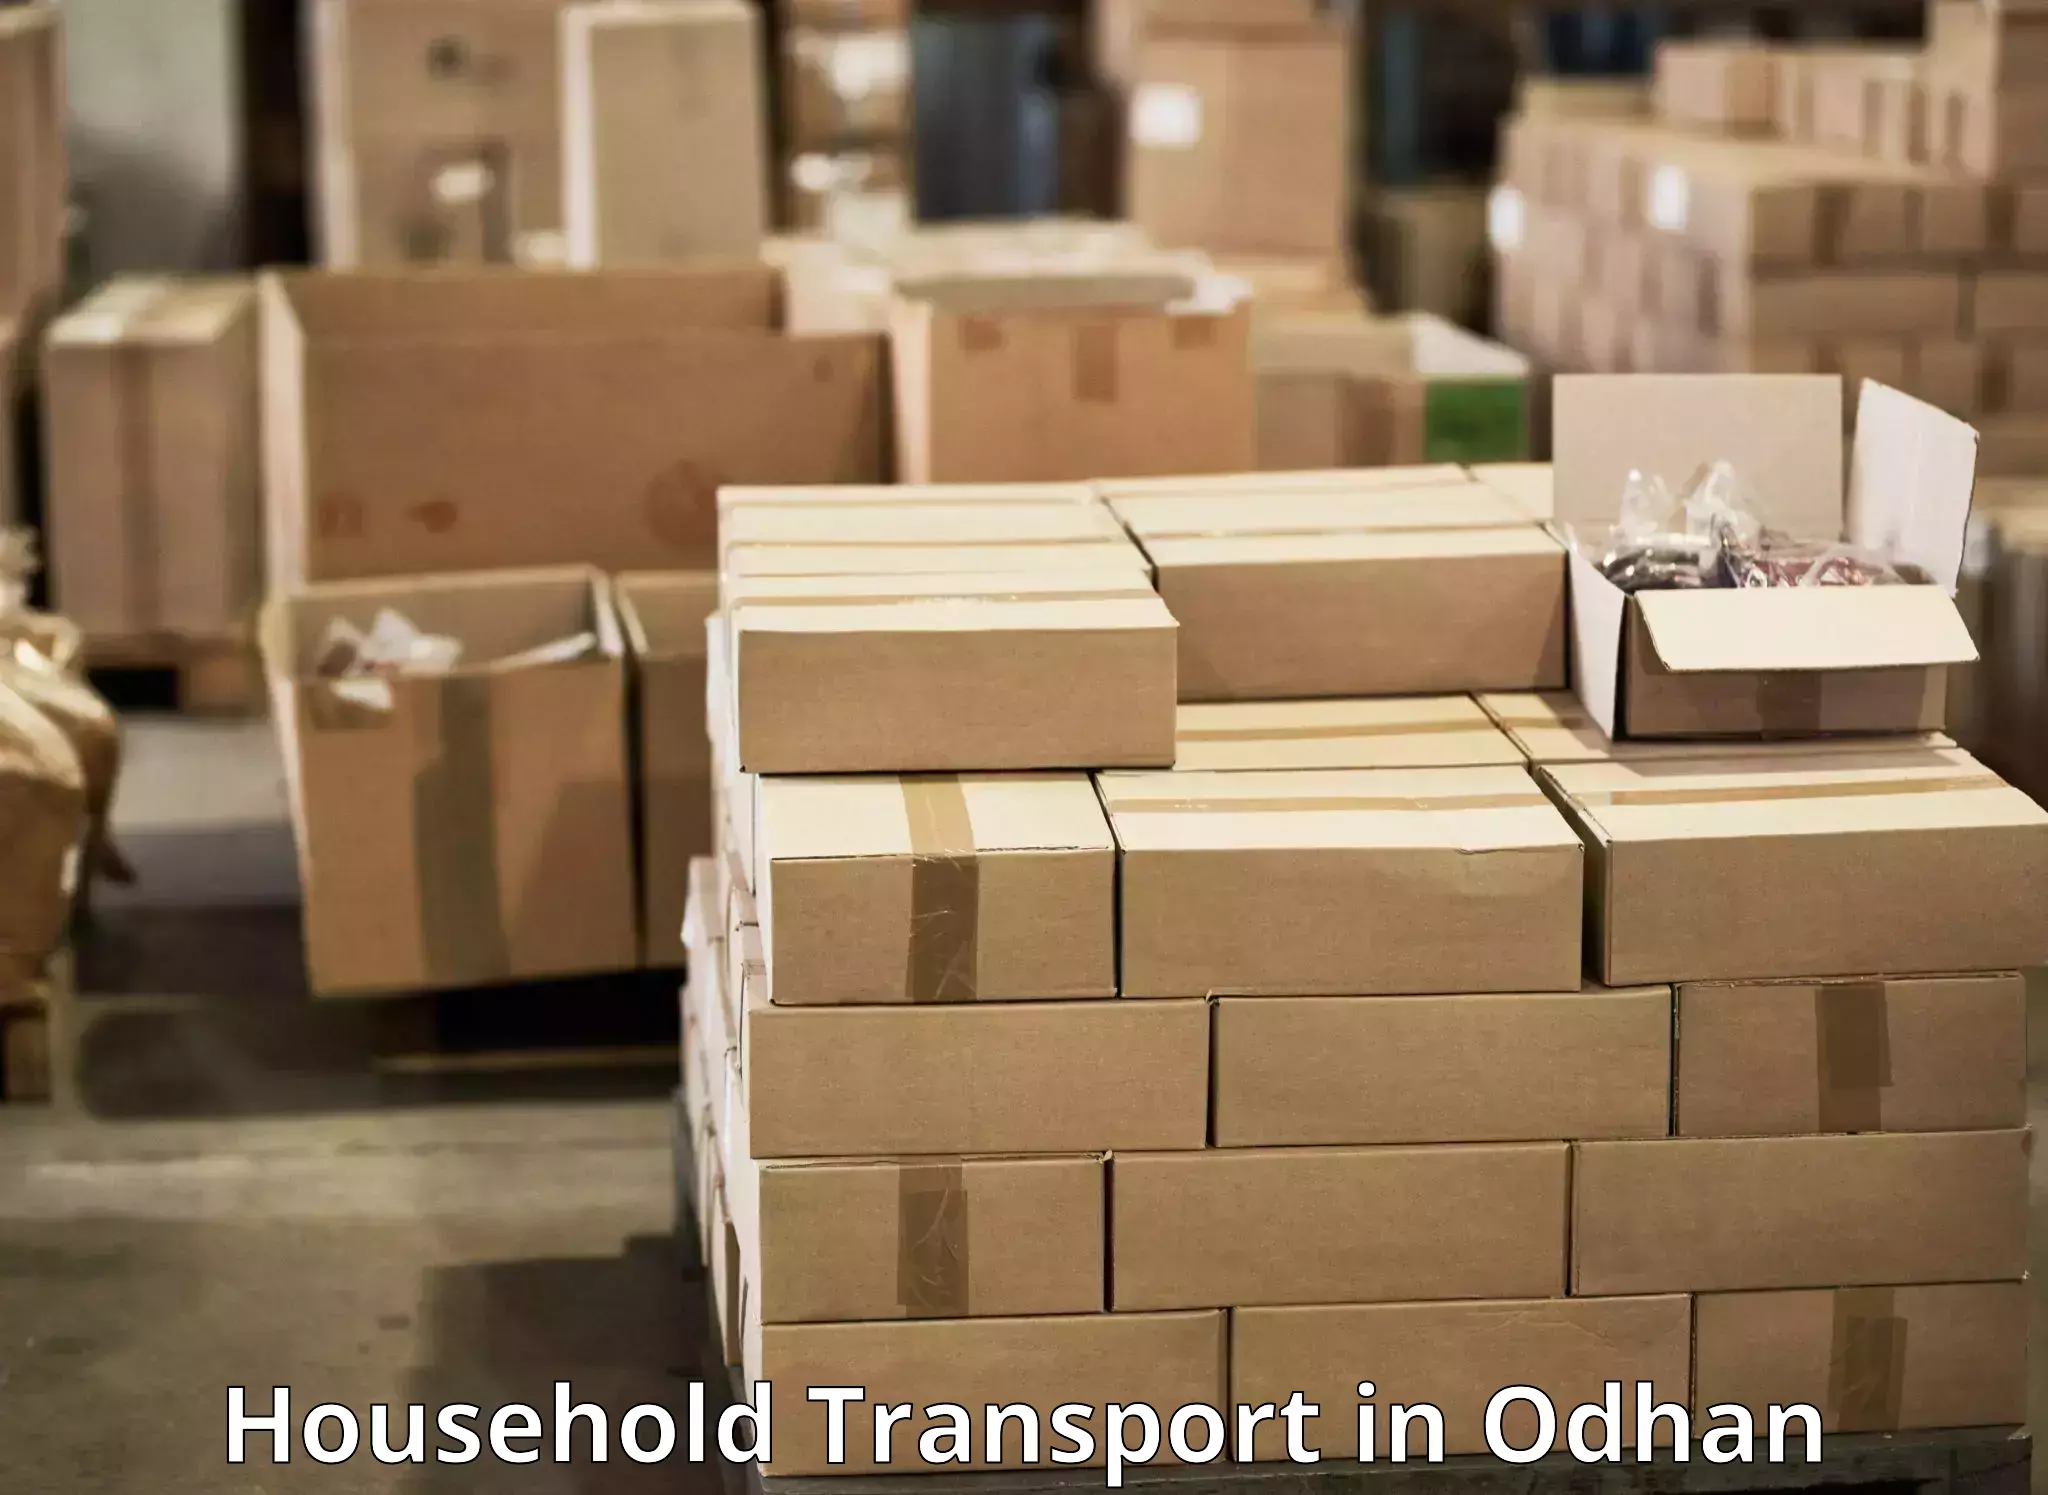 Household goods transport service in Odhan